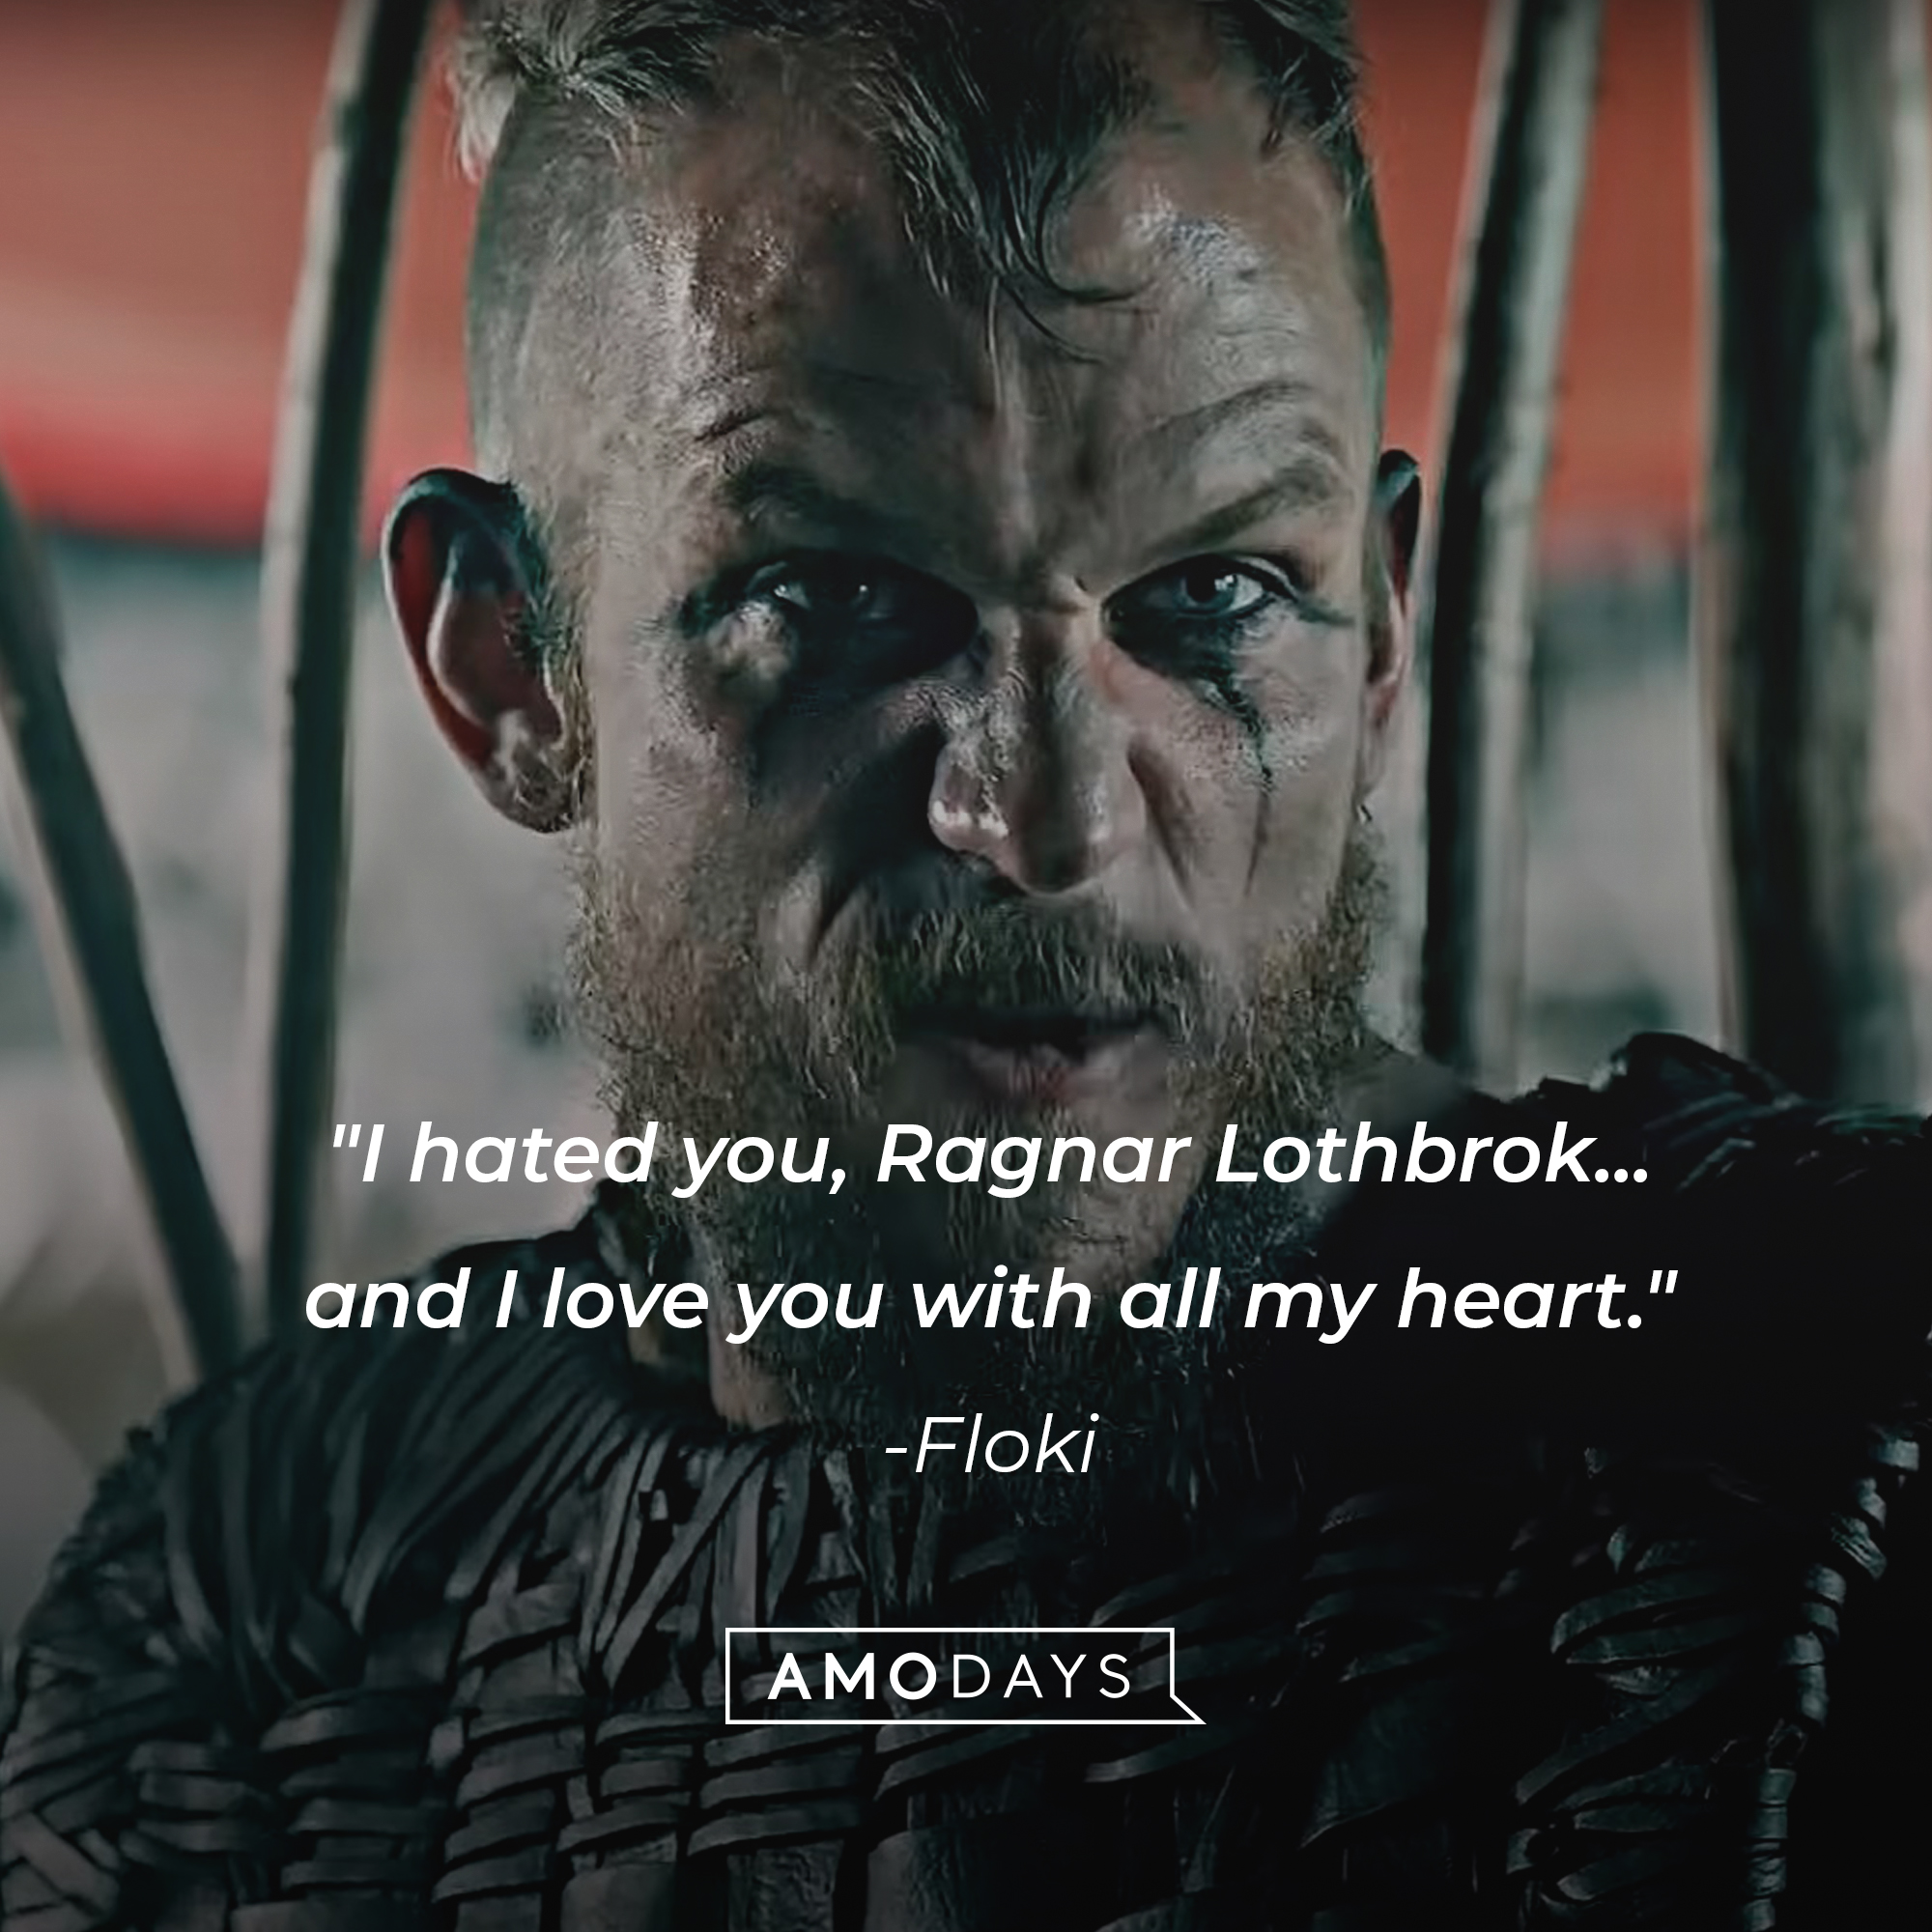 An image of Floki with his quote: "I hated you, Ragnar Lothbrok...and I love you with all my heart." | Source: facebook.com/Viking